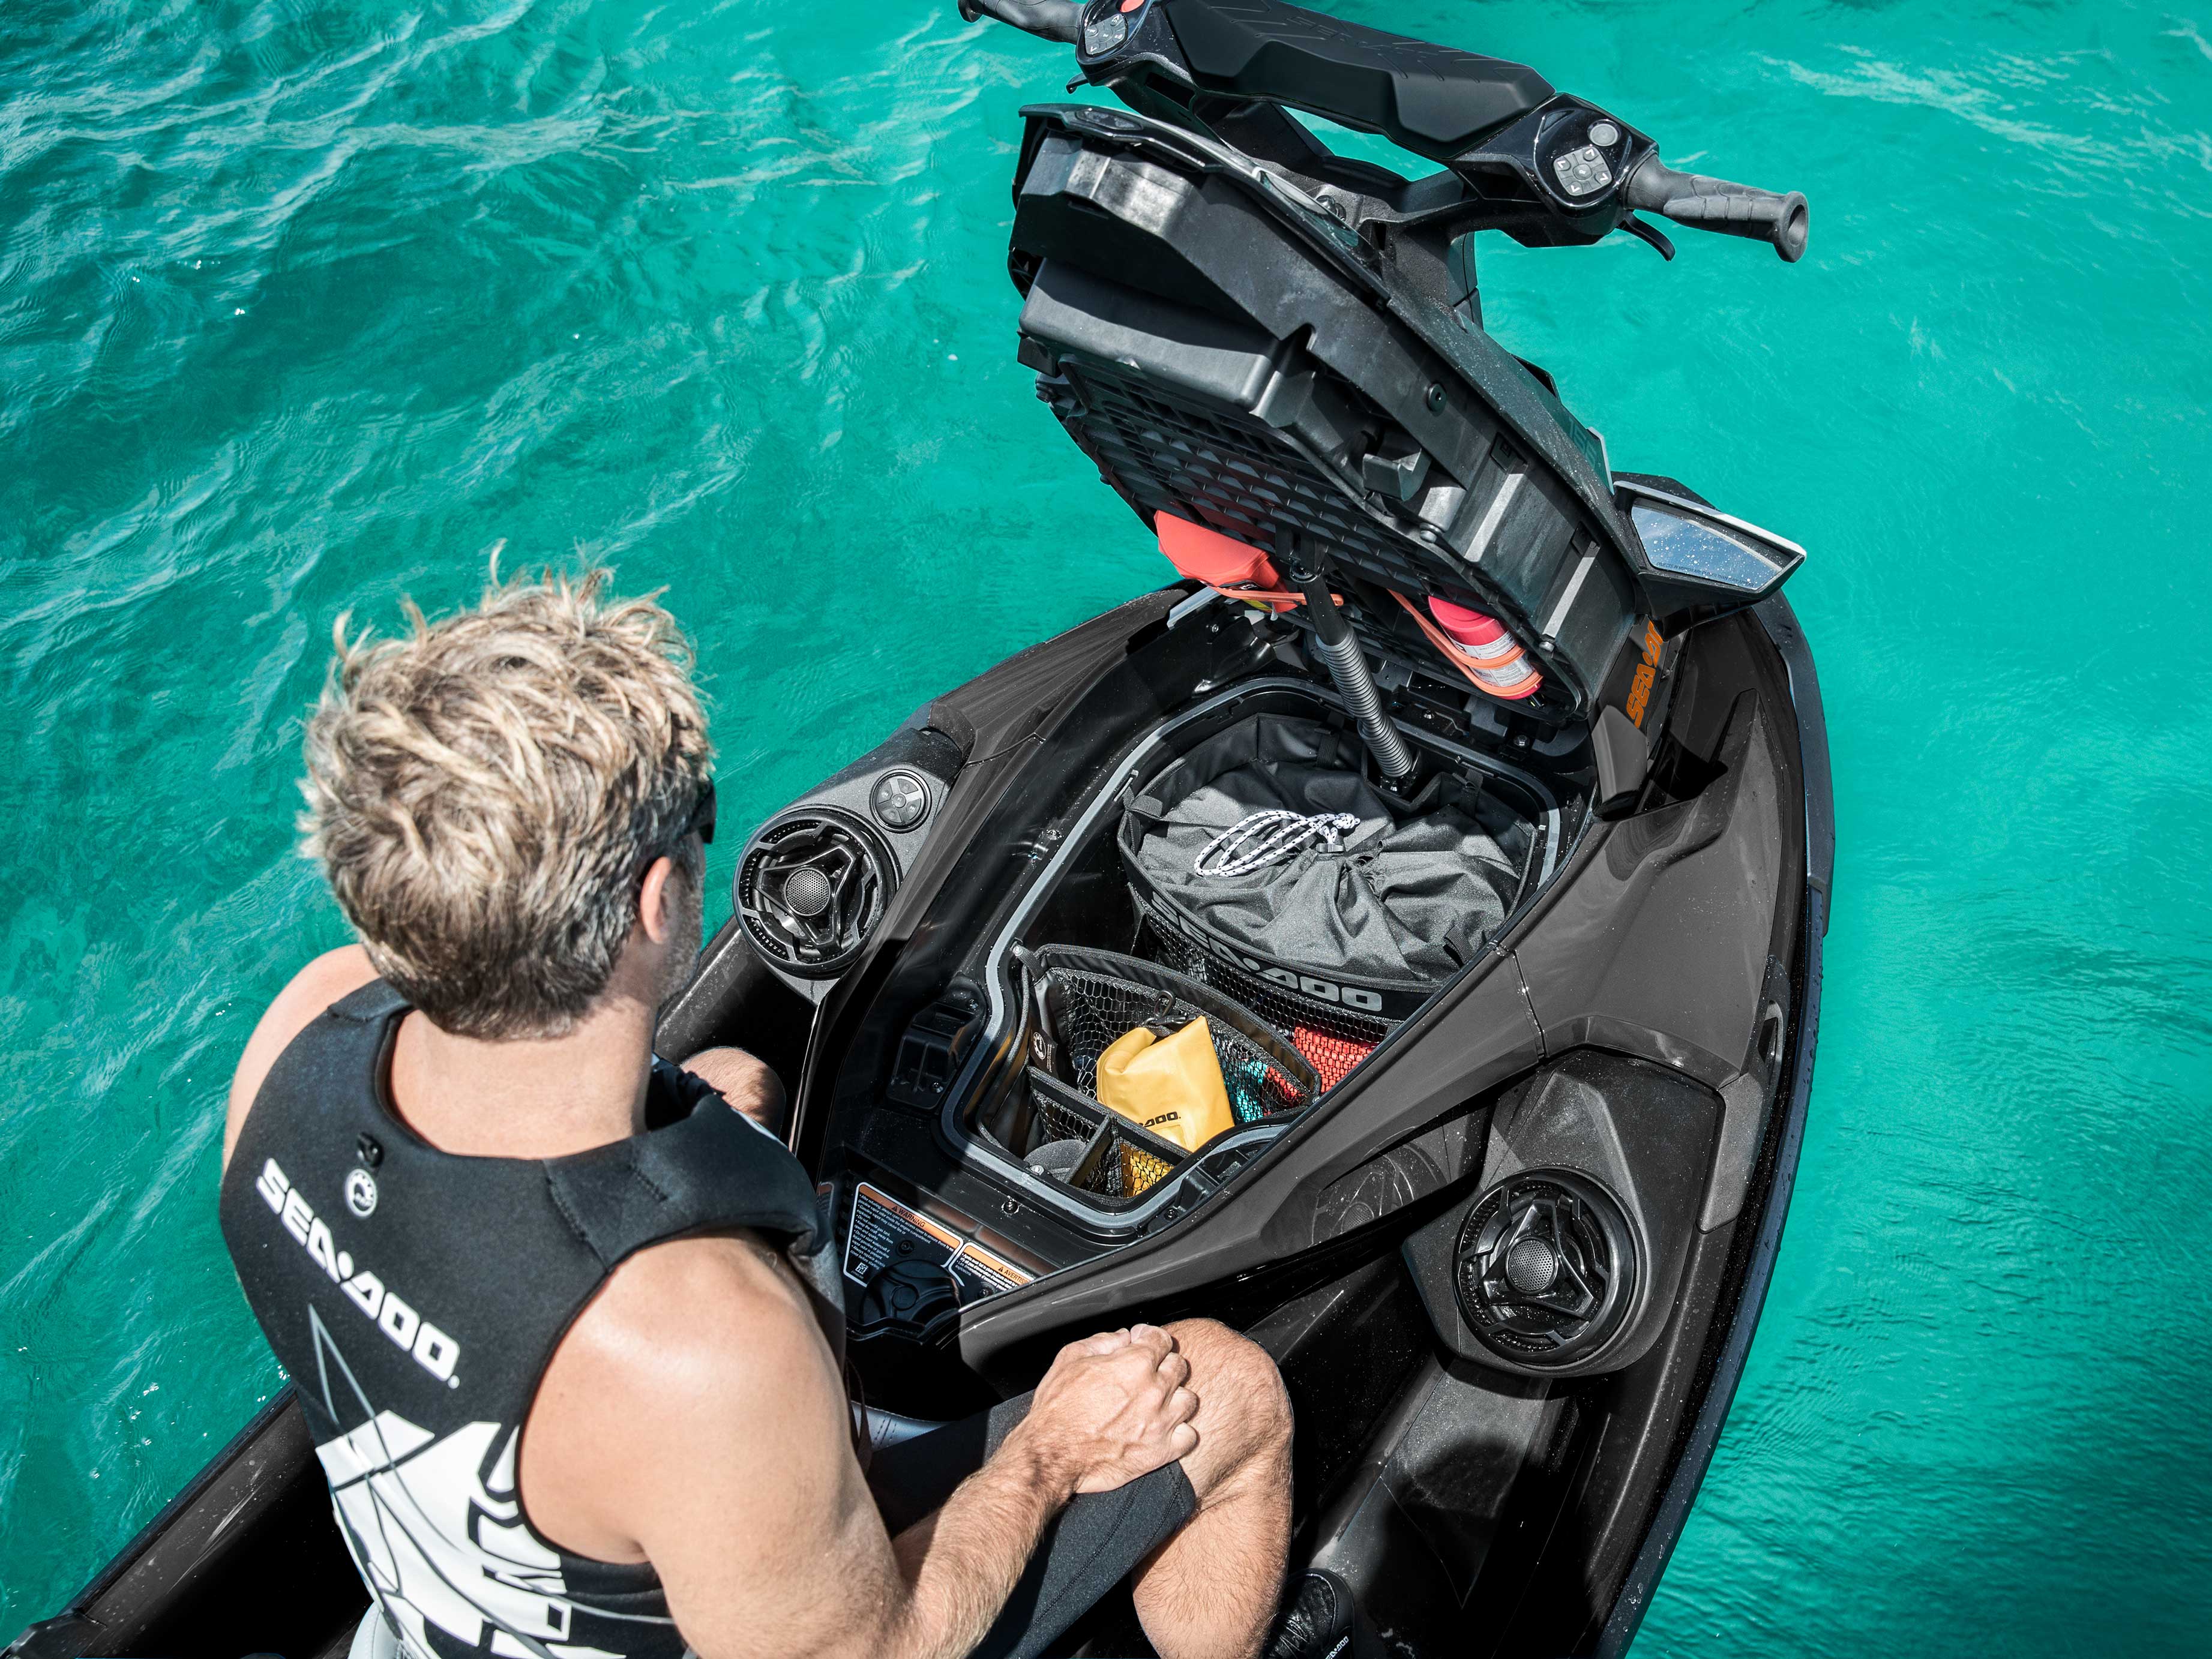 Overhead image of a person on a Sea-Doo floating on water with the front storage opened and audio system installed